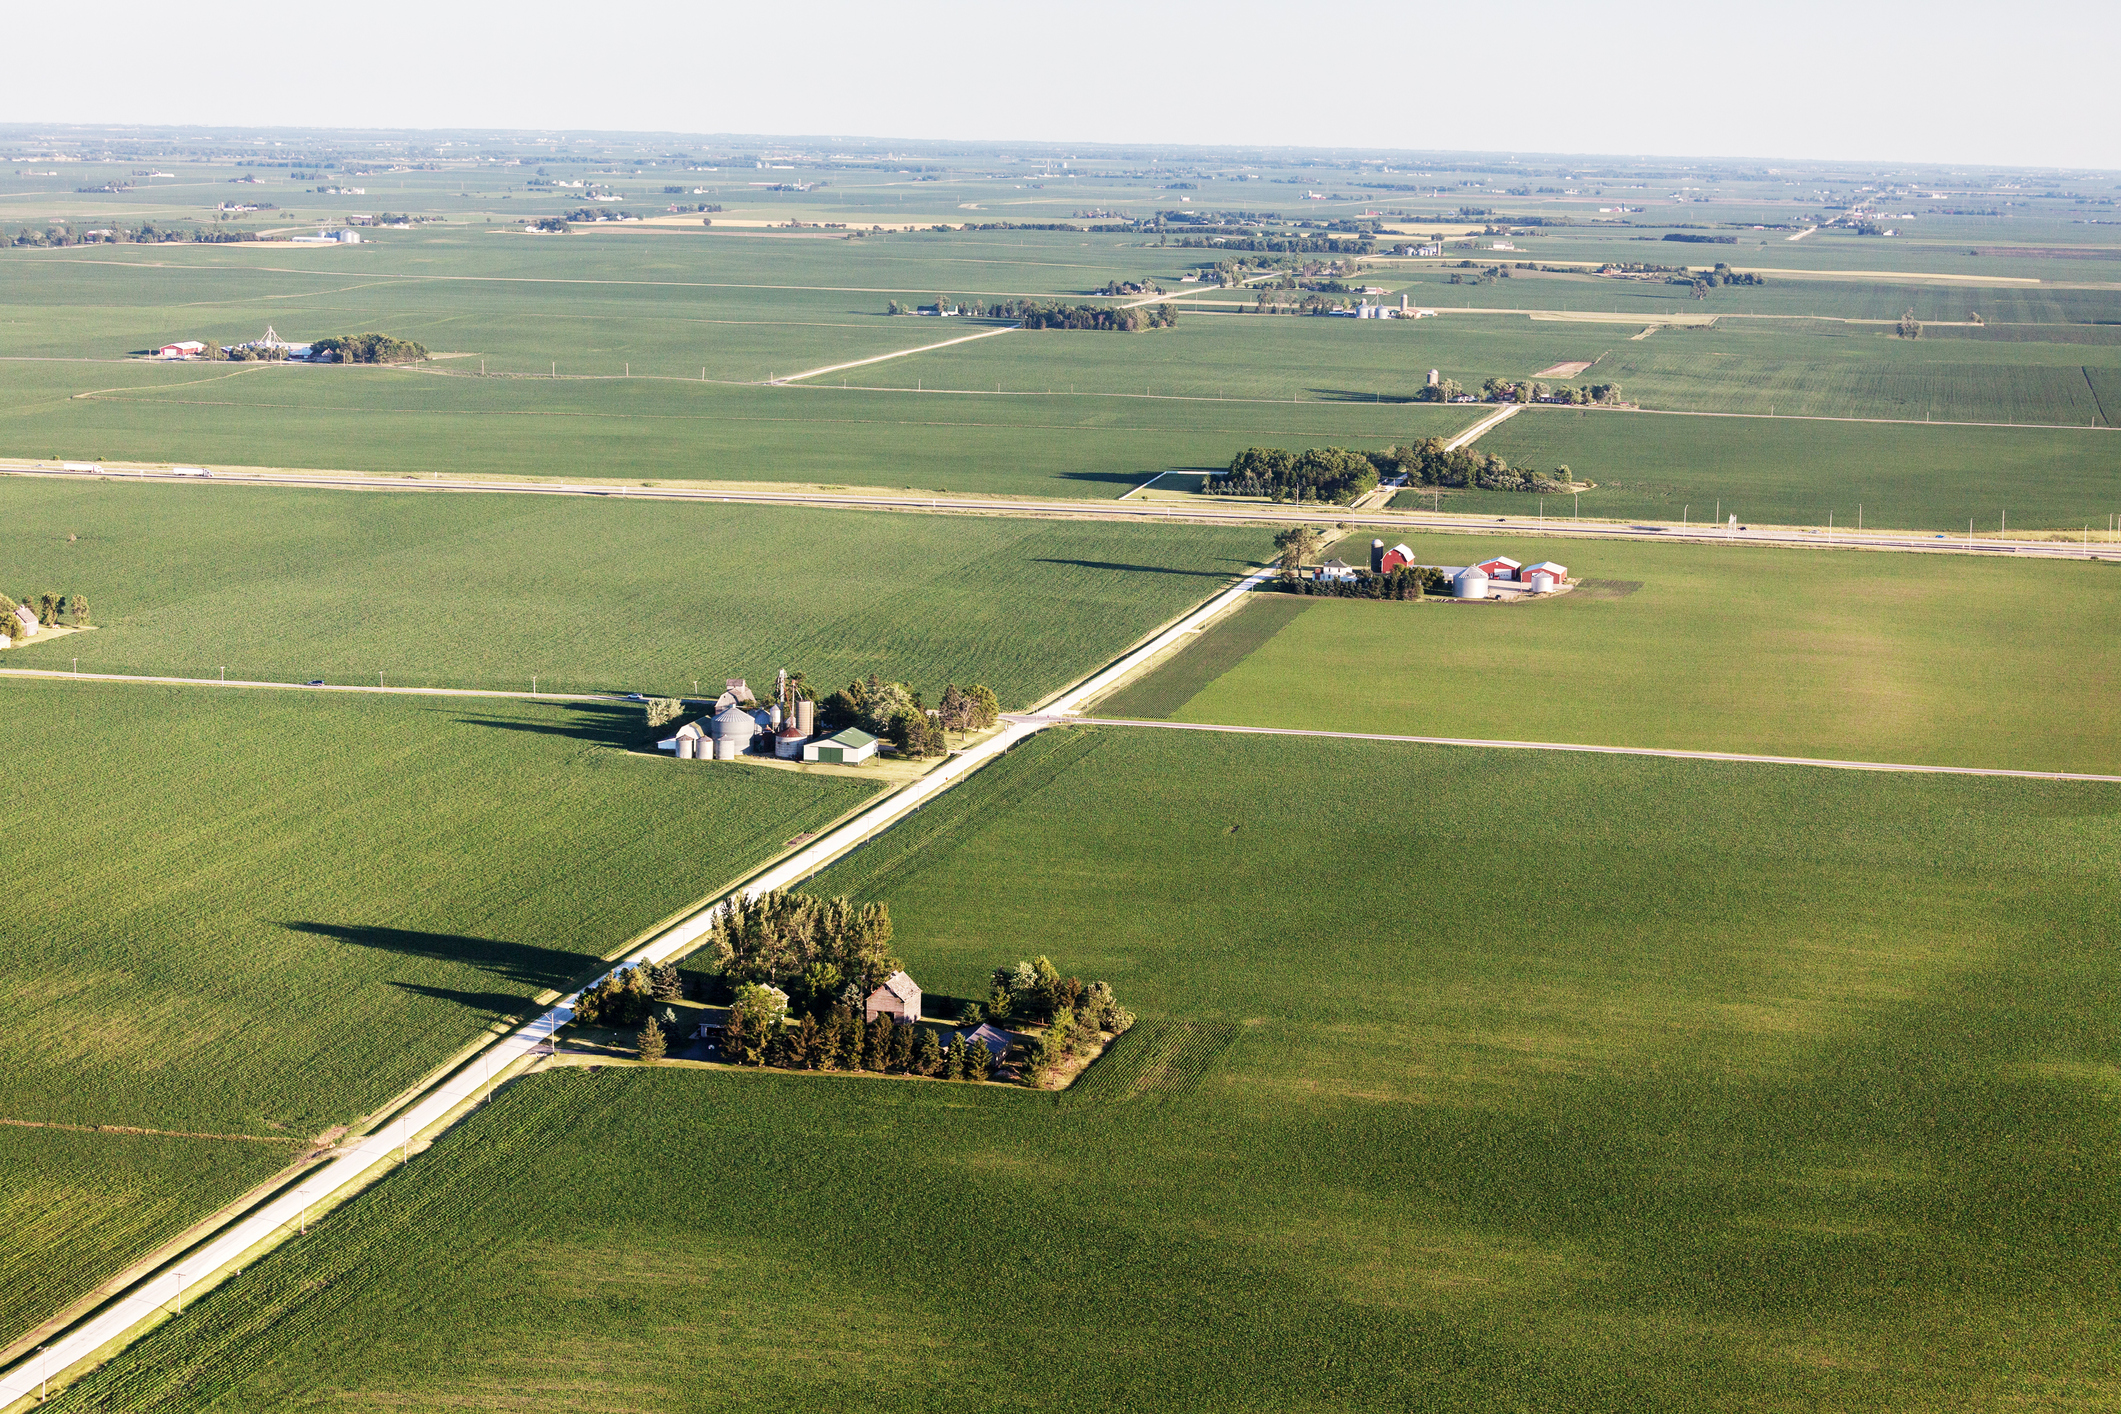 Aerial view of Farmland in Northern Illinois. Late afternoon  in June. Farms, highway, country road and crop fields. (Aerial view of Farmland in Northern Illinois. Late afternoon  in June. Farms, highway, country road and crop fields., ASCII, 117 comp